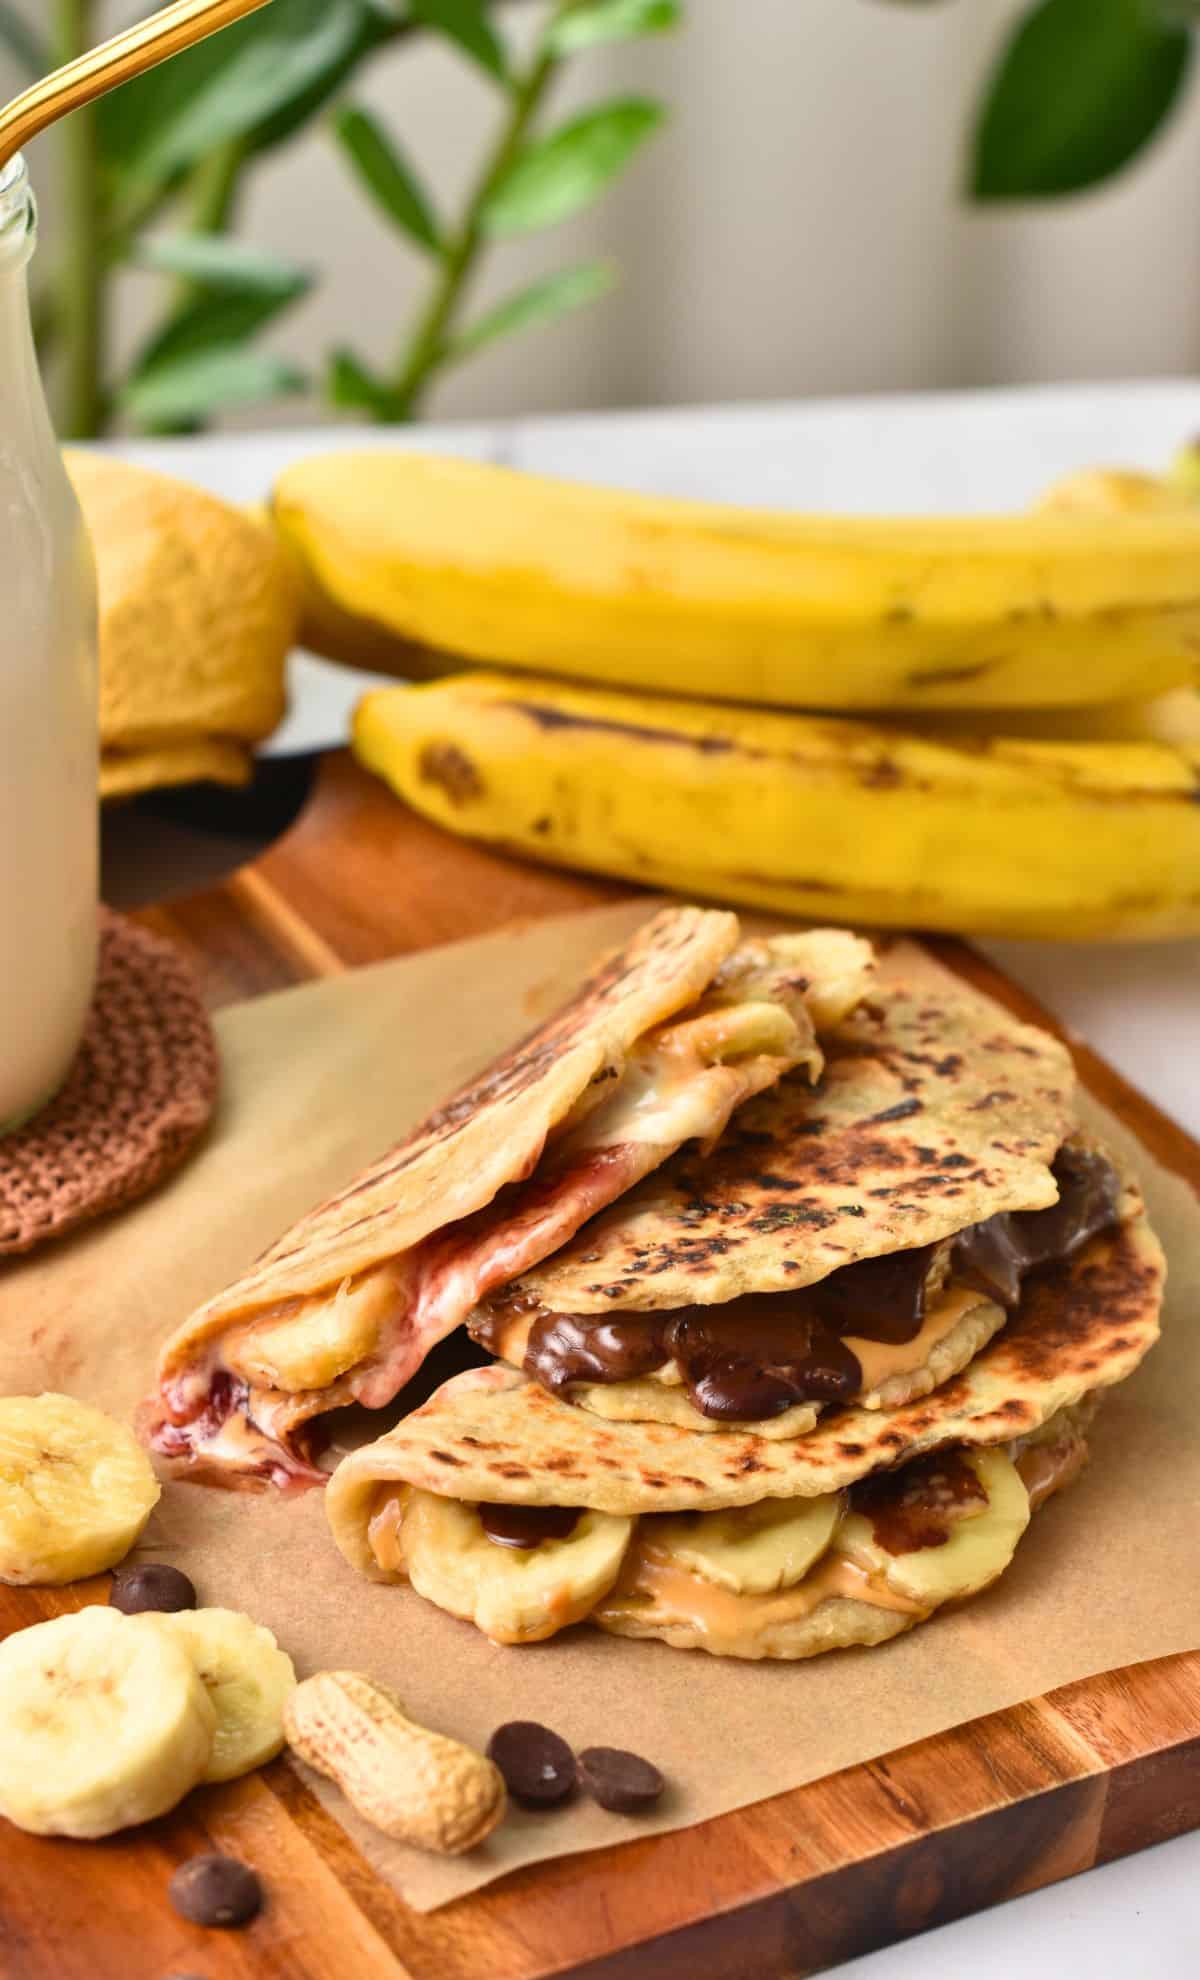 Toasted Banana Tortillas filled with bananas and chocolate chips.